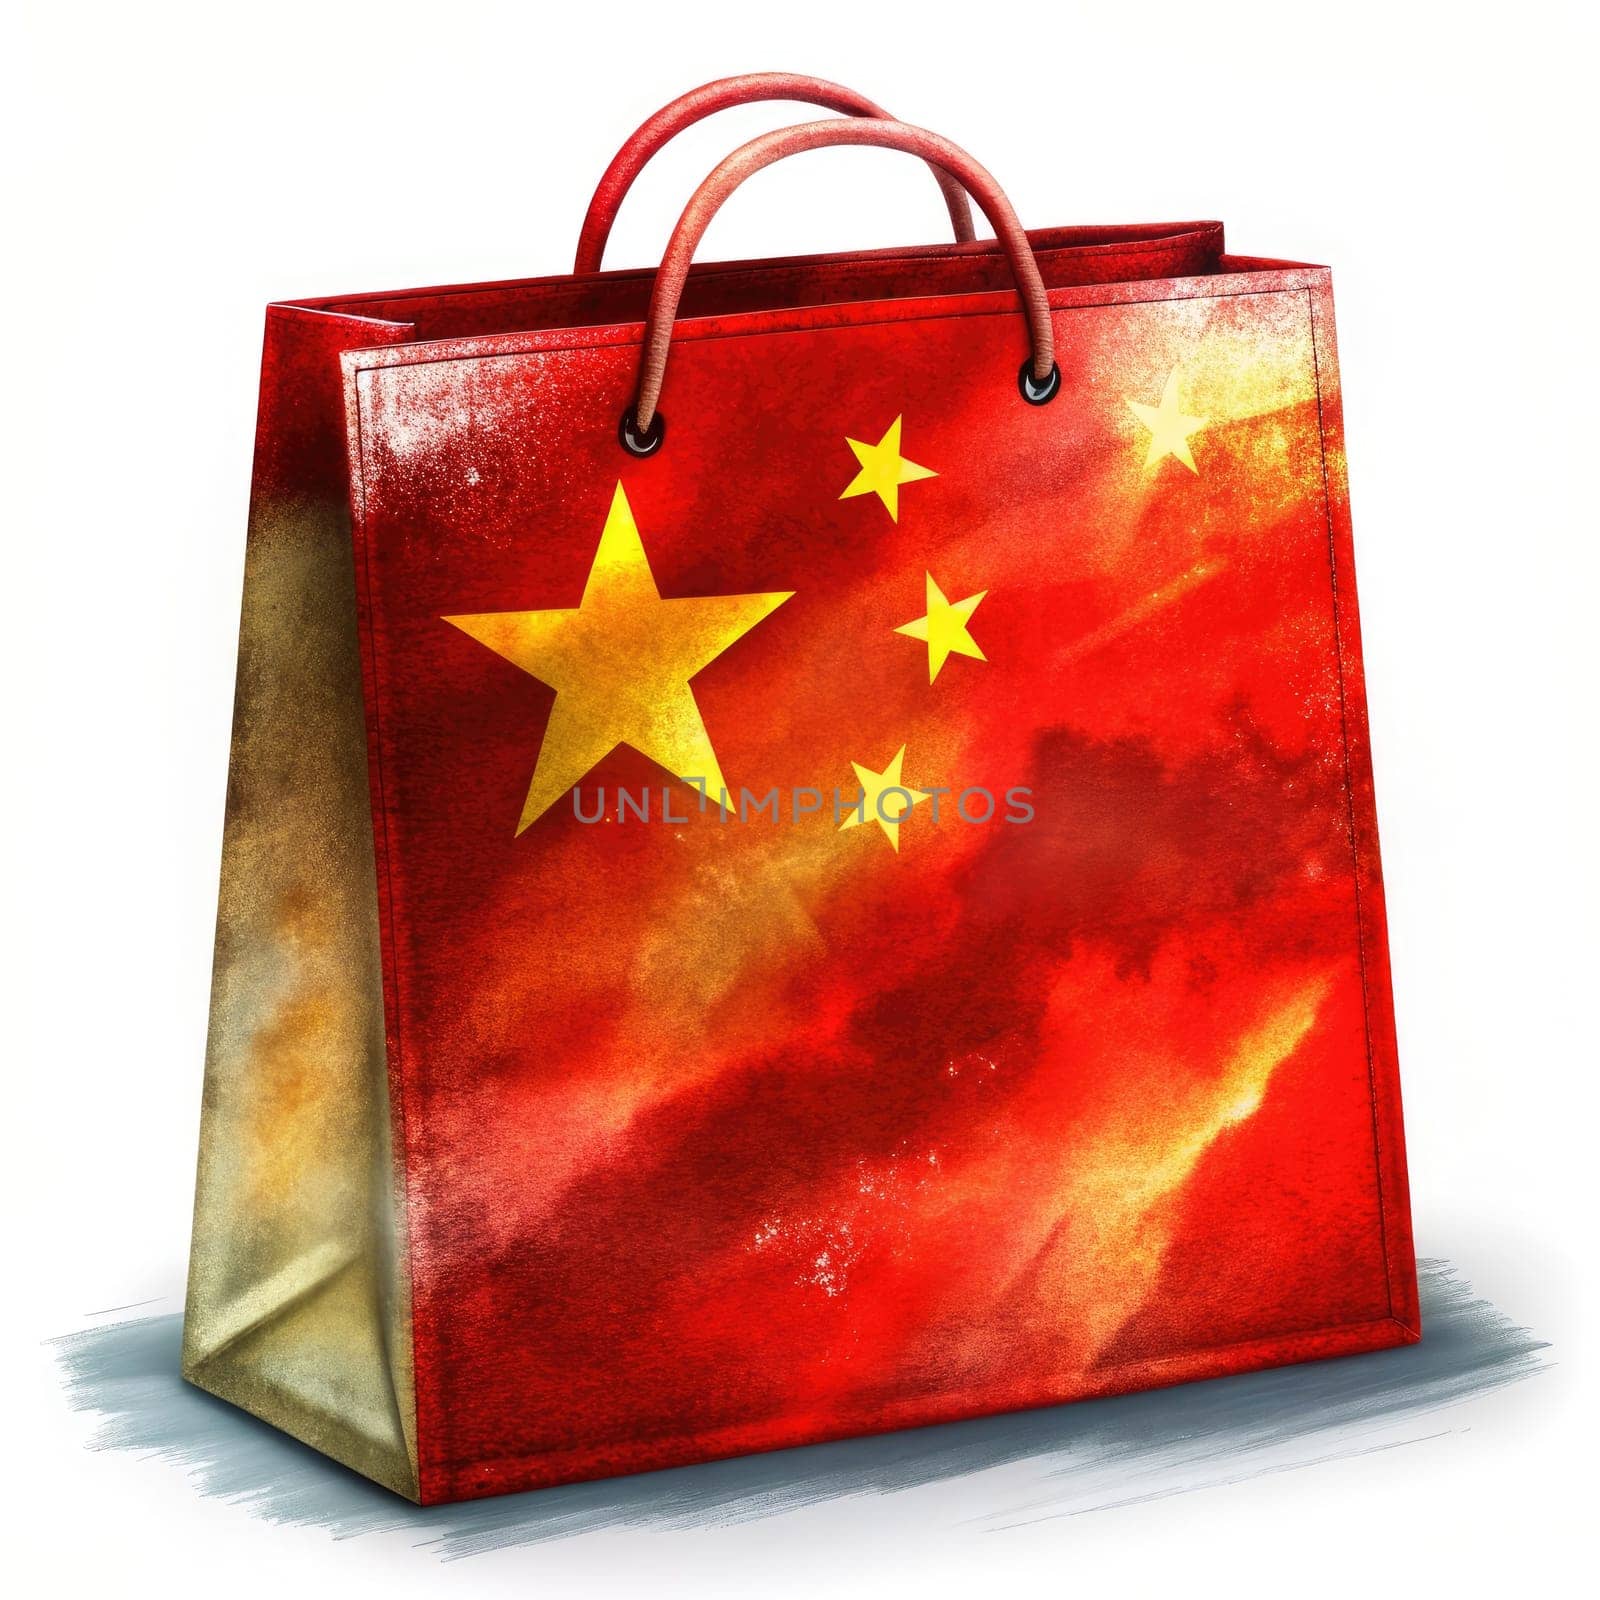 CHINA Flag Shopping Bag: Iconic Symbol of Chinese Pride on White Background. Premium Quality: Durable CHINA Flag Shopping Bag for Stylish Travelers. Chinese Heritage: Flag-Inspired Shopping Tote Bag for Trendy Outings by Andrii_Ko